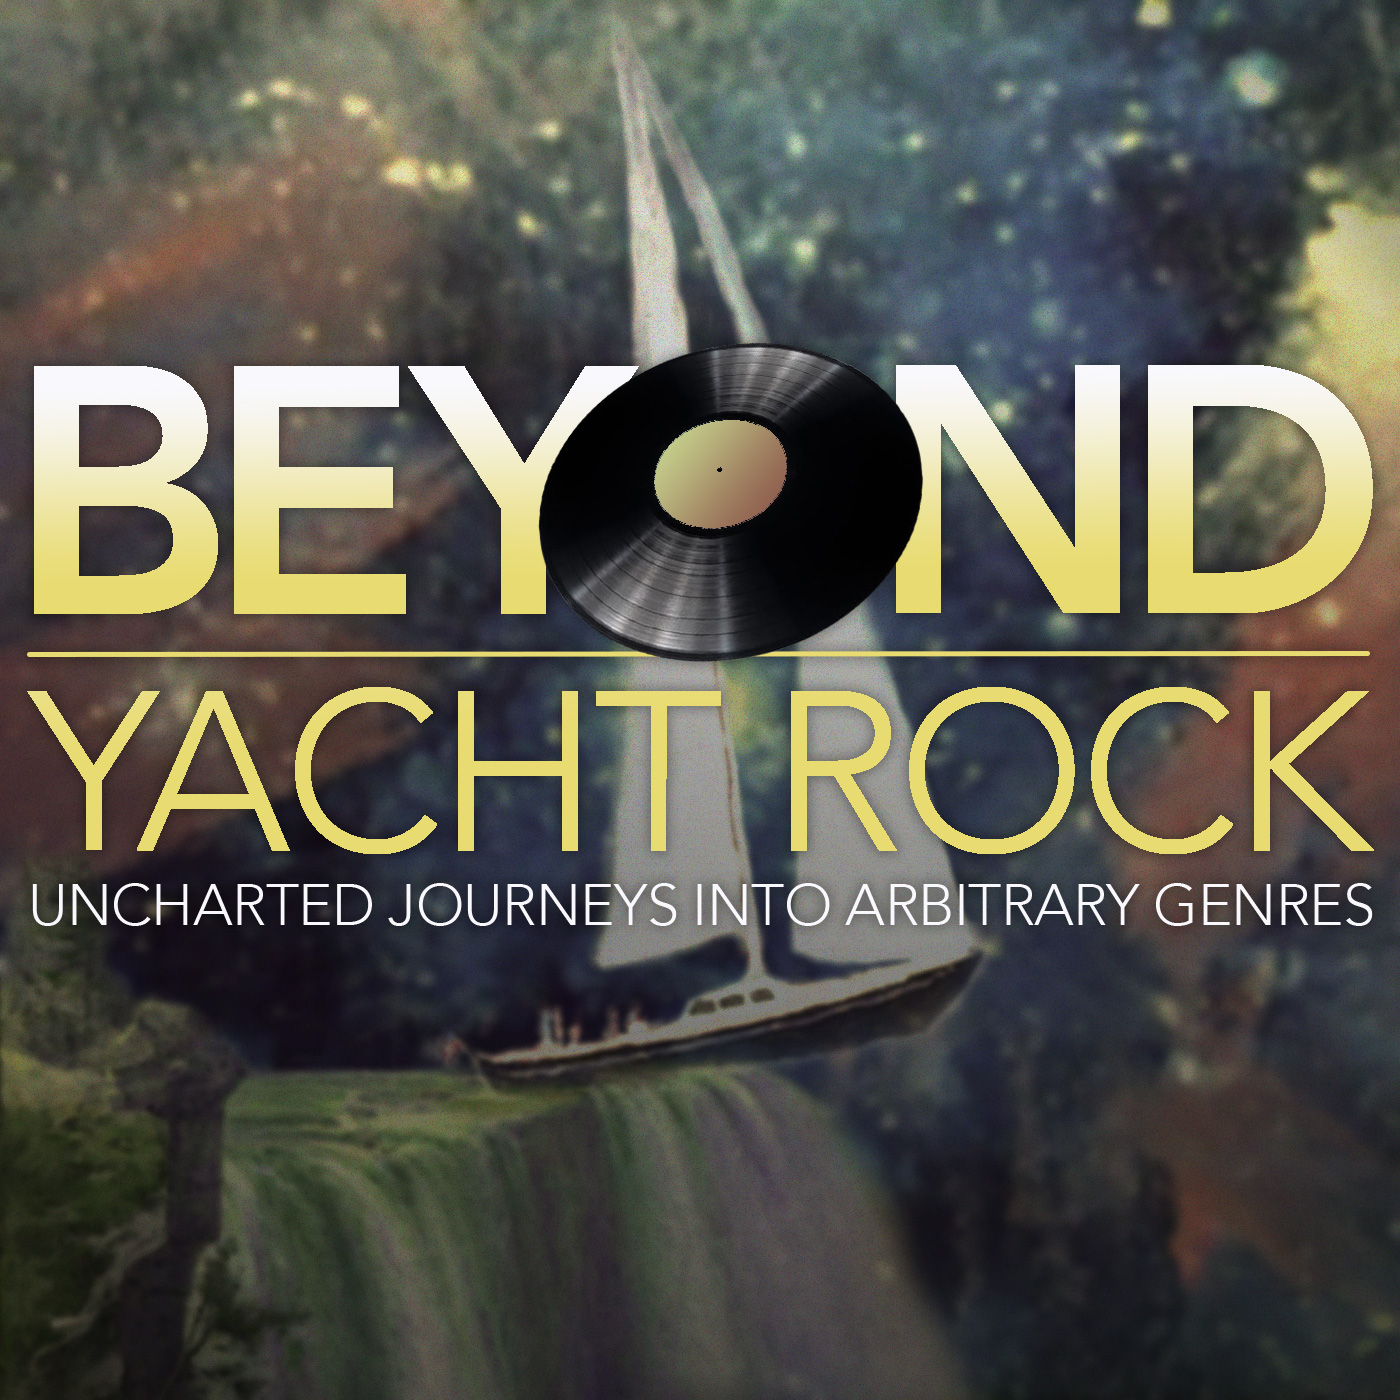 Beyond Yacht Rock Podcast Cover - Square